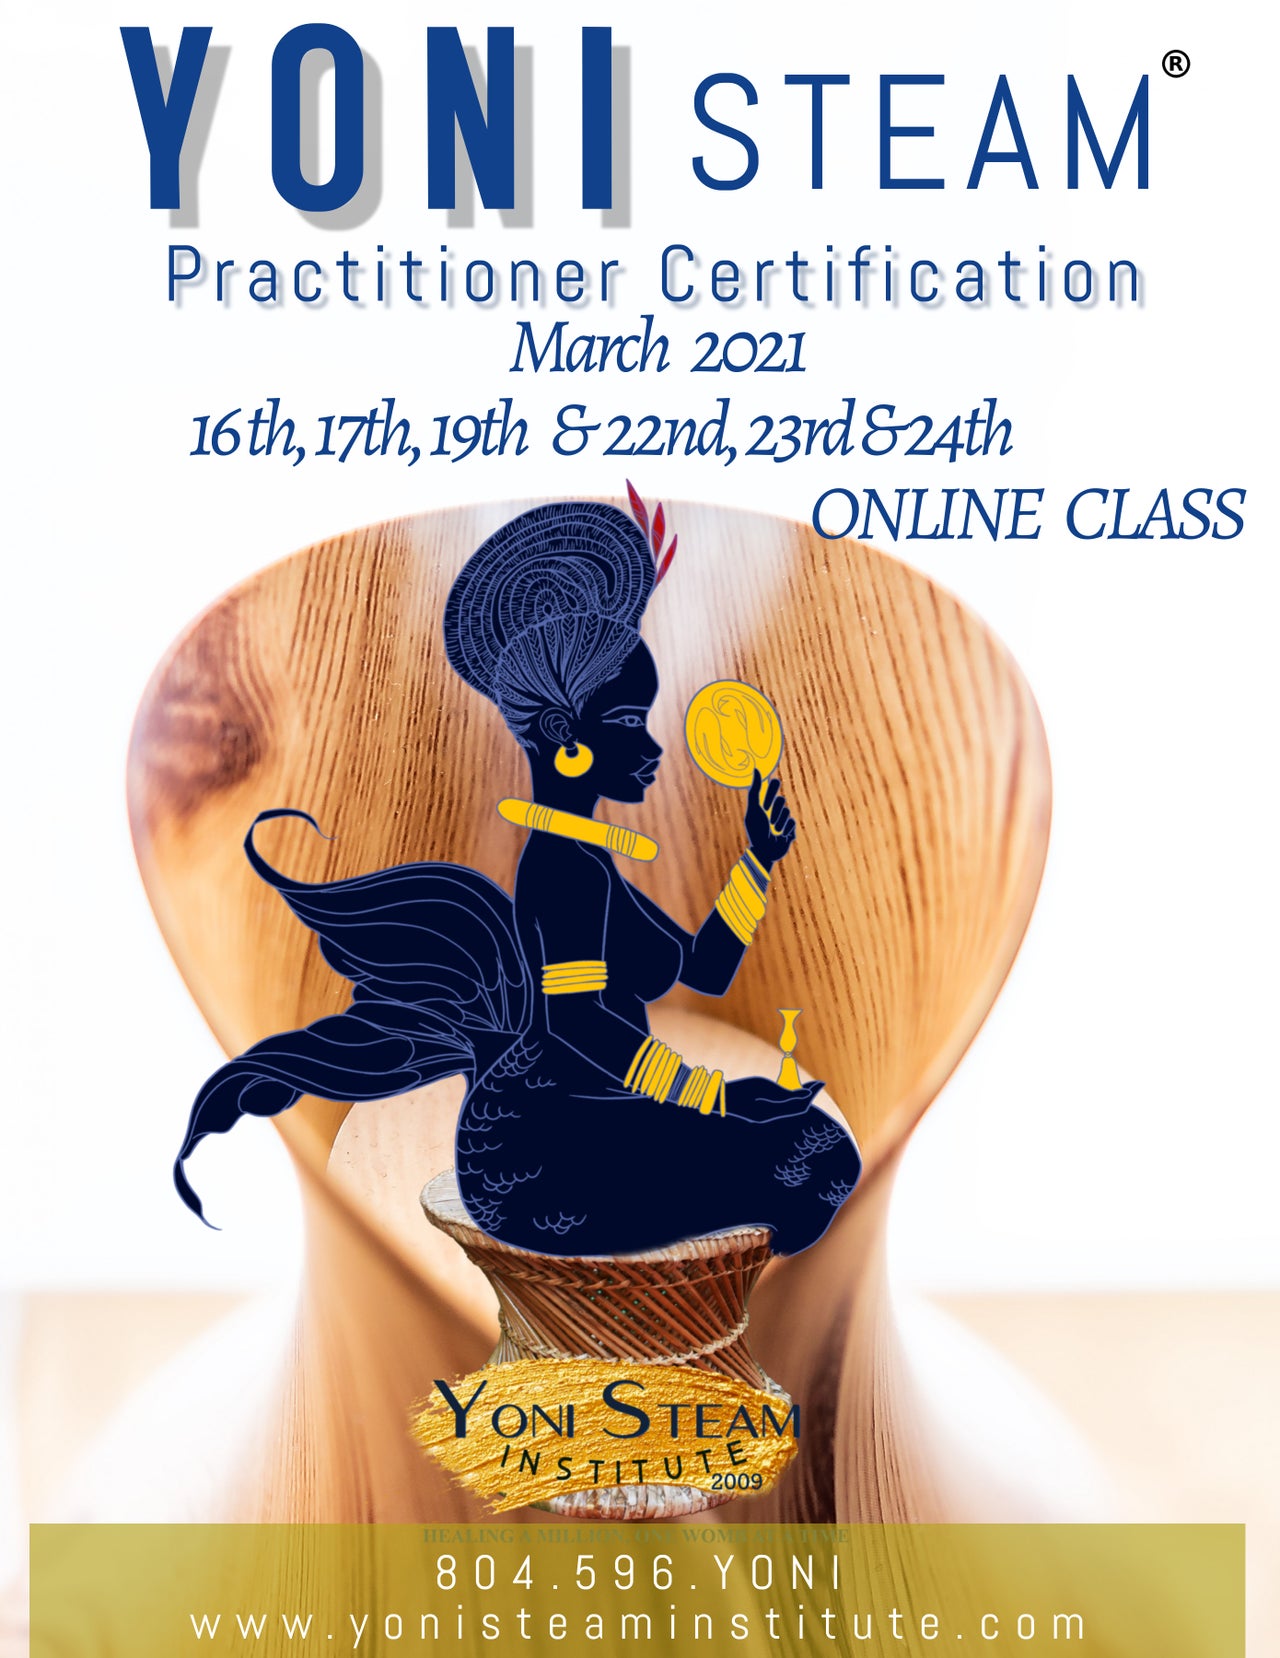 YONI STEAM PRACTITIONER CERTIFICATION